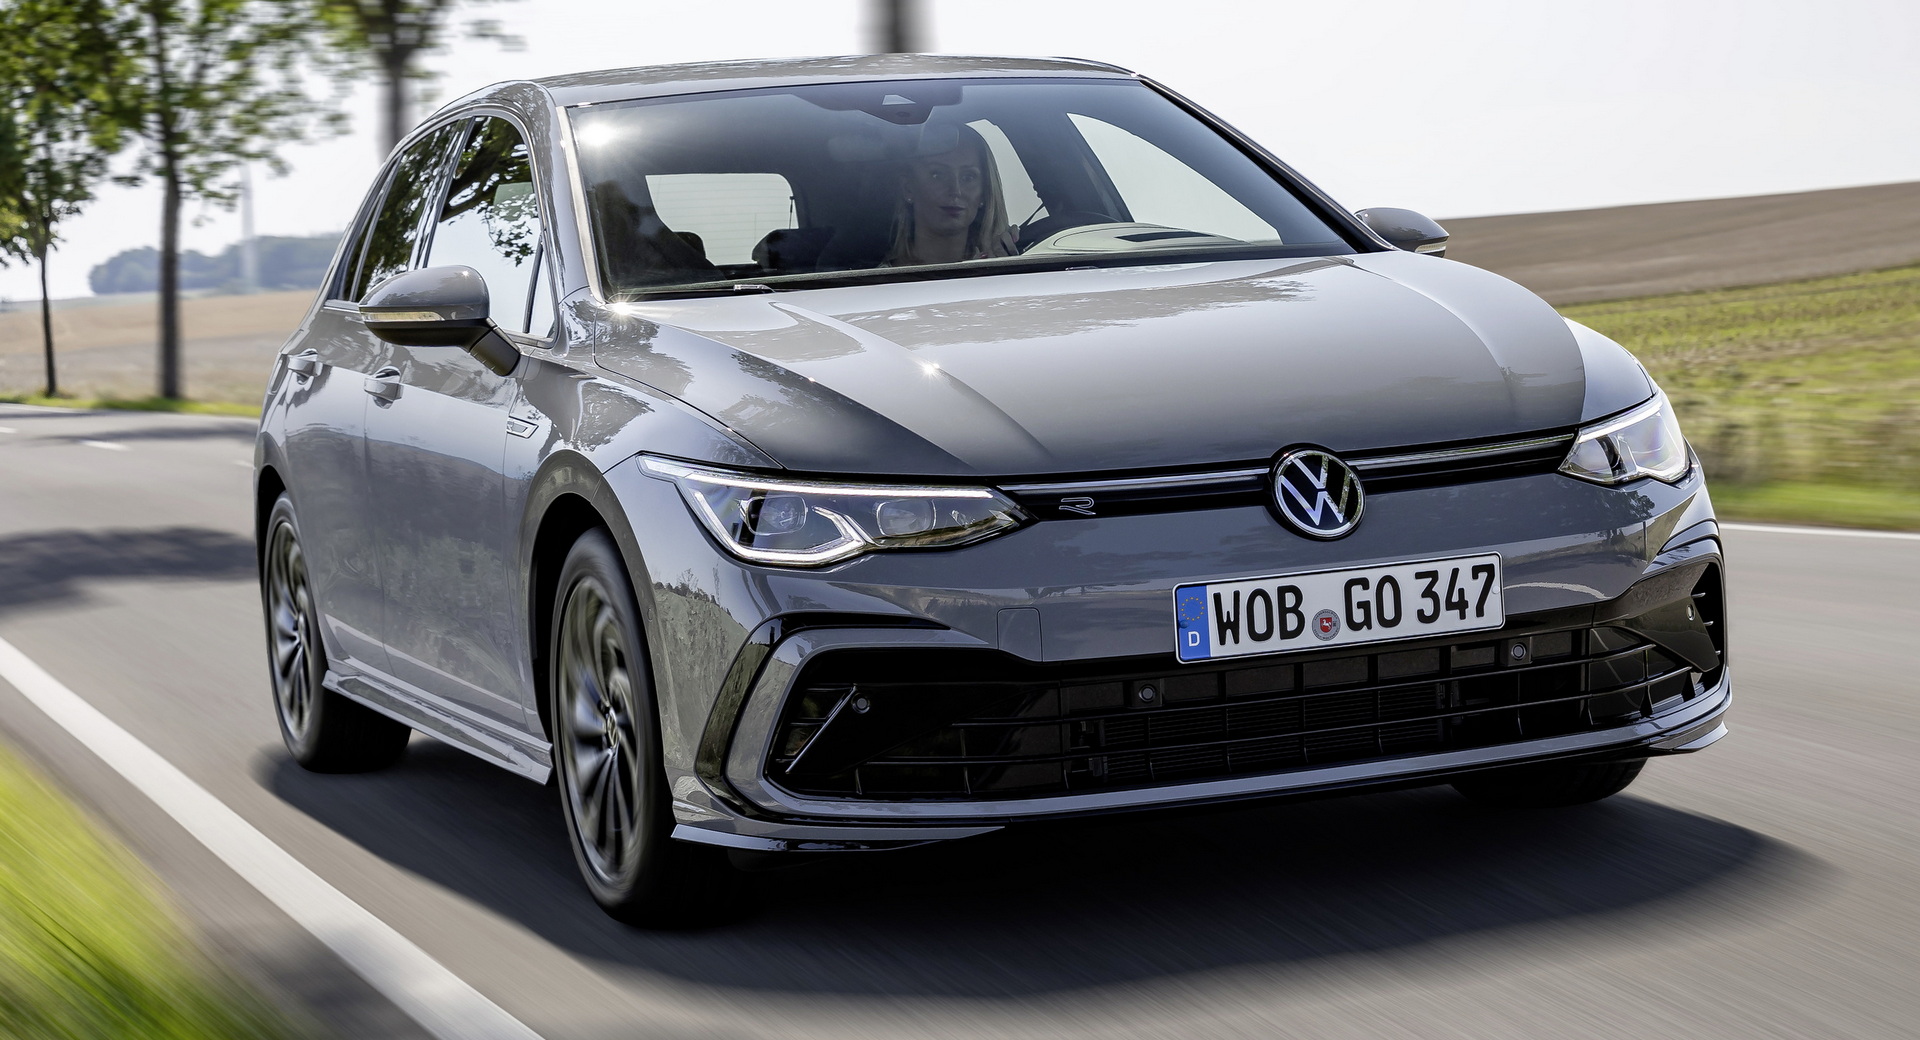 The VW Golf Is Europe's (And Germany's) Best Selling Car For 2020